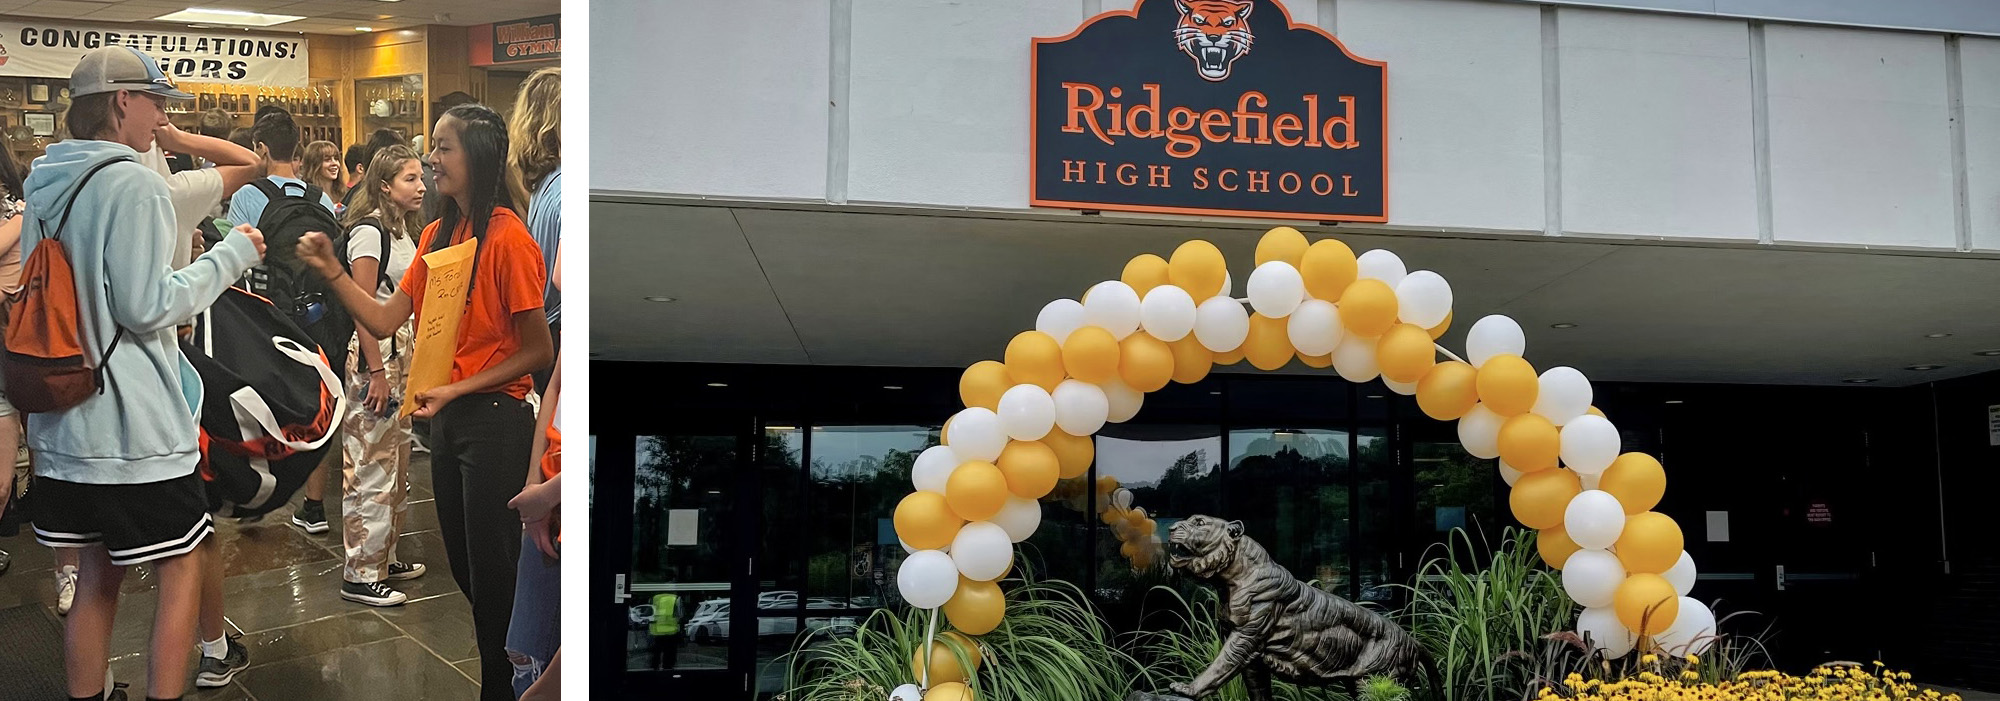 Ninth Grade Orientation and RHS Tiger Statue with balloons